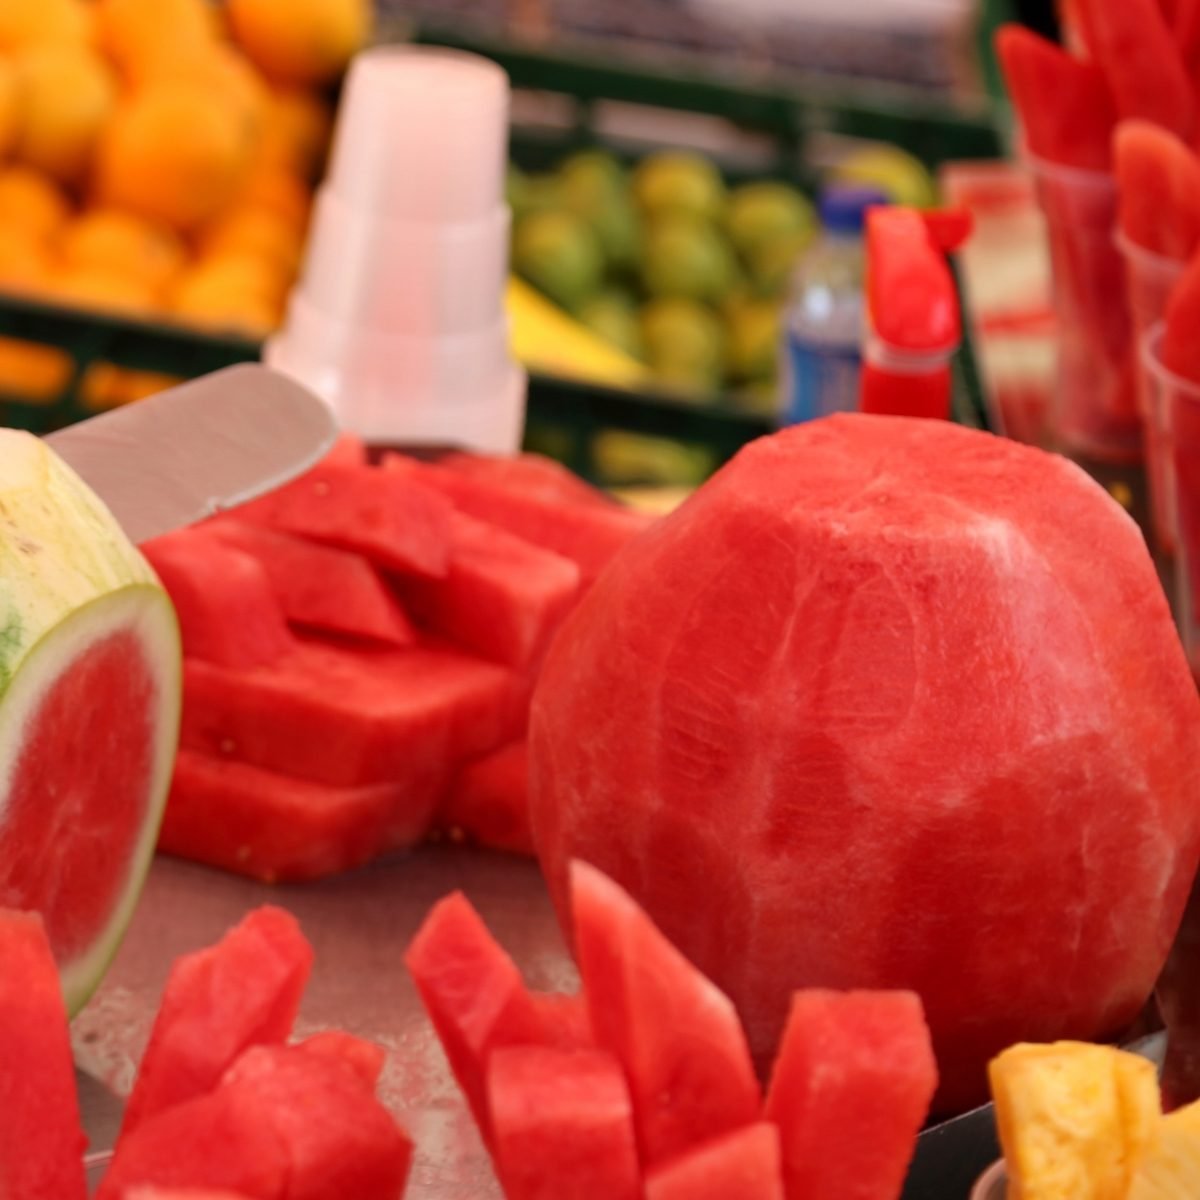 Man cuts the watermelon with a knife to prepare the fruit salad for sale